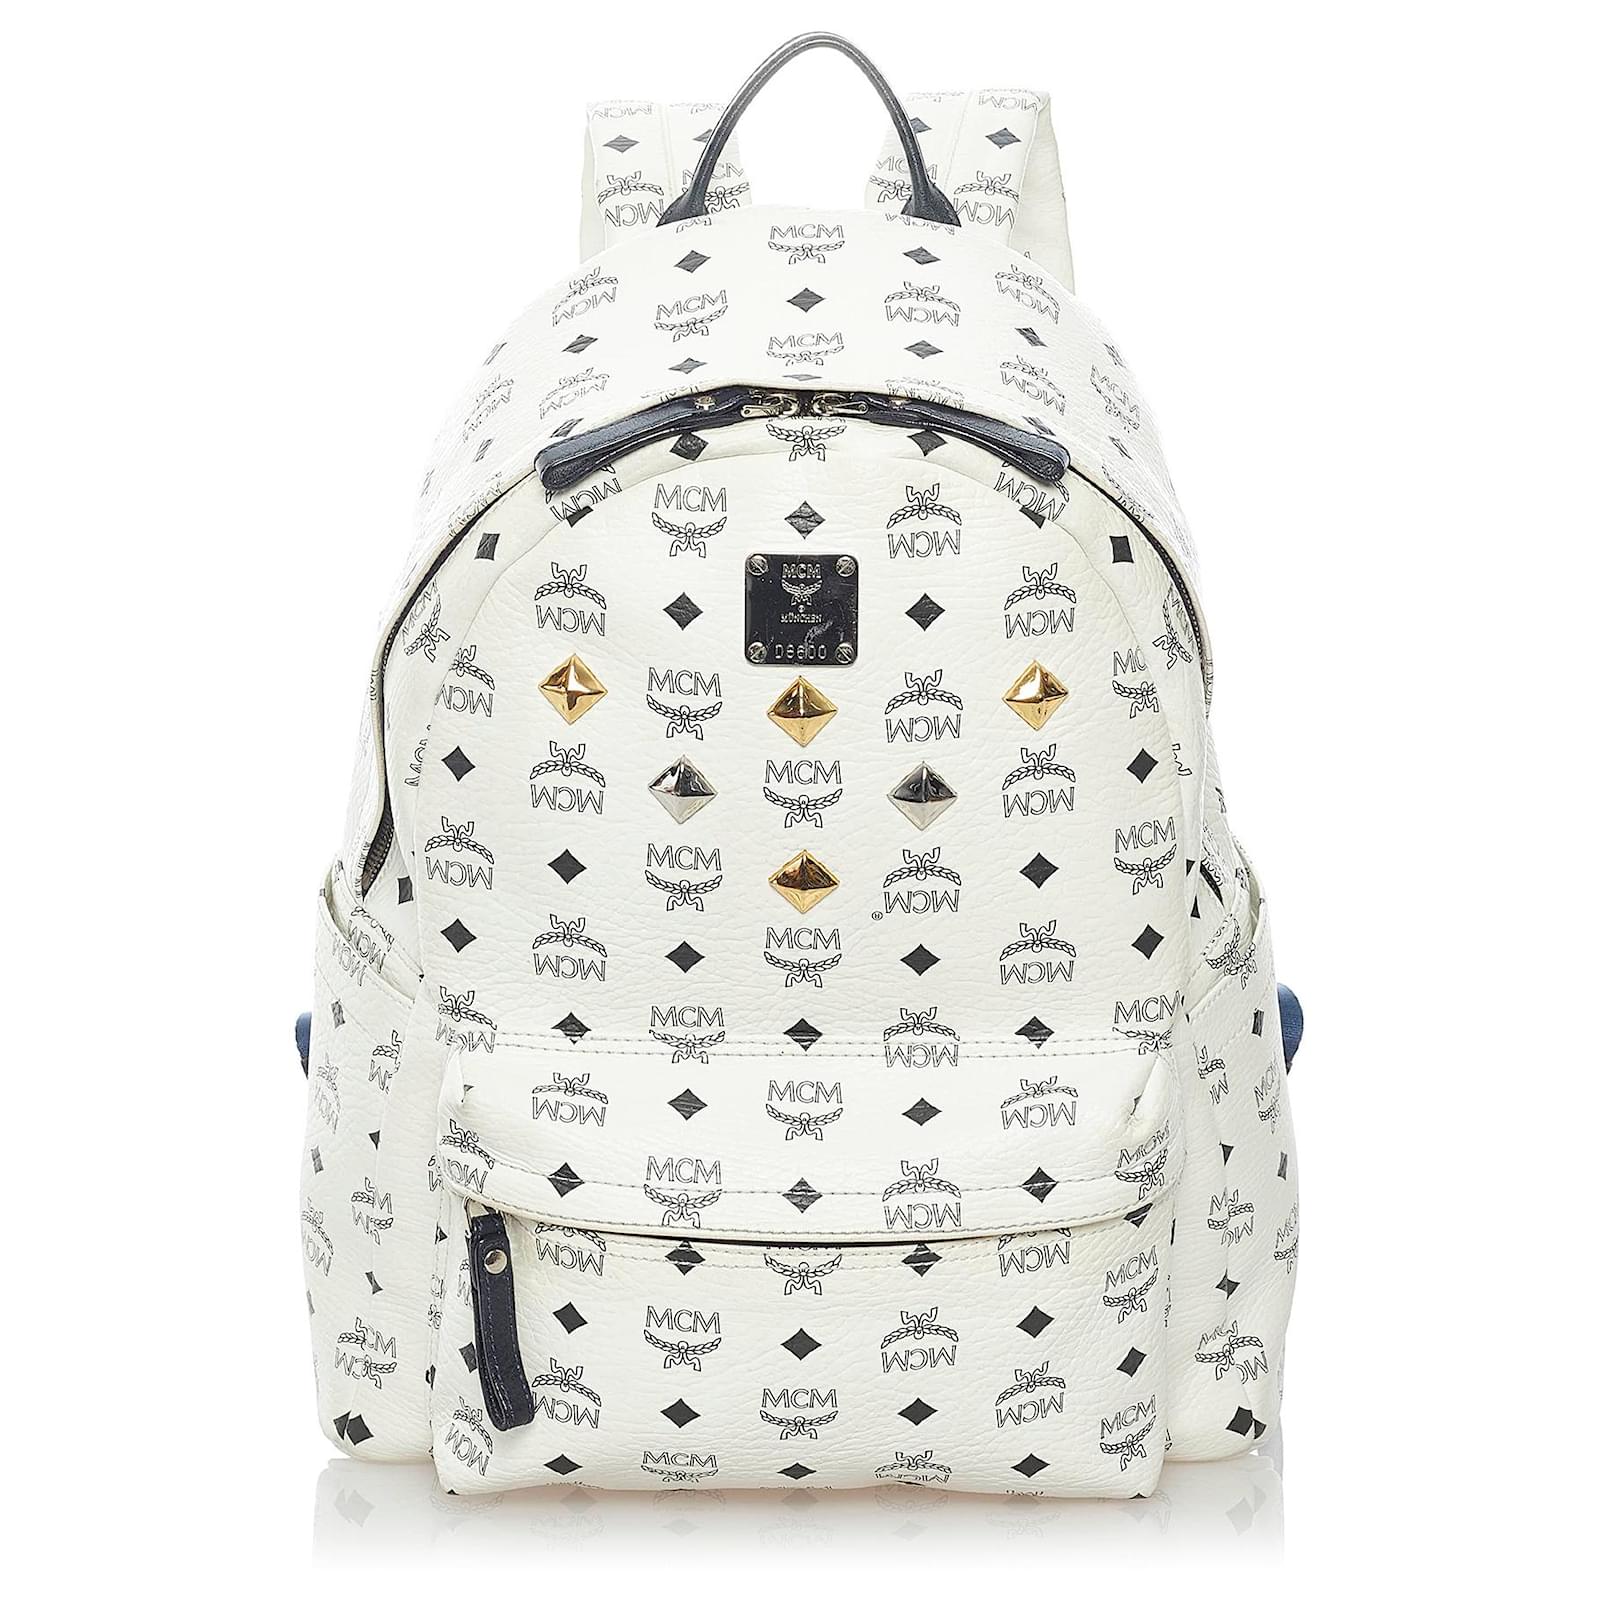 Stark White Backpack, Deux Lux Bags